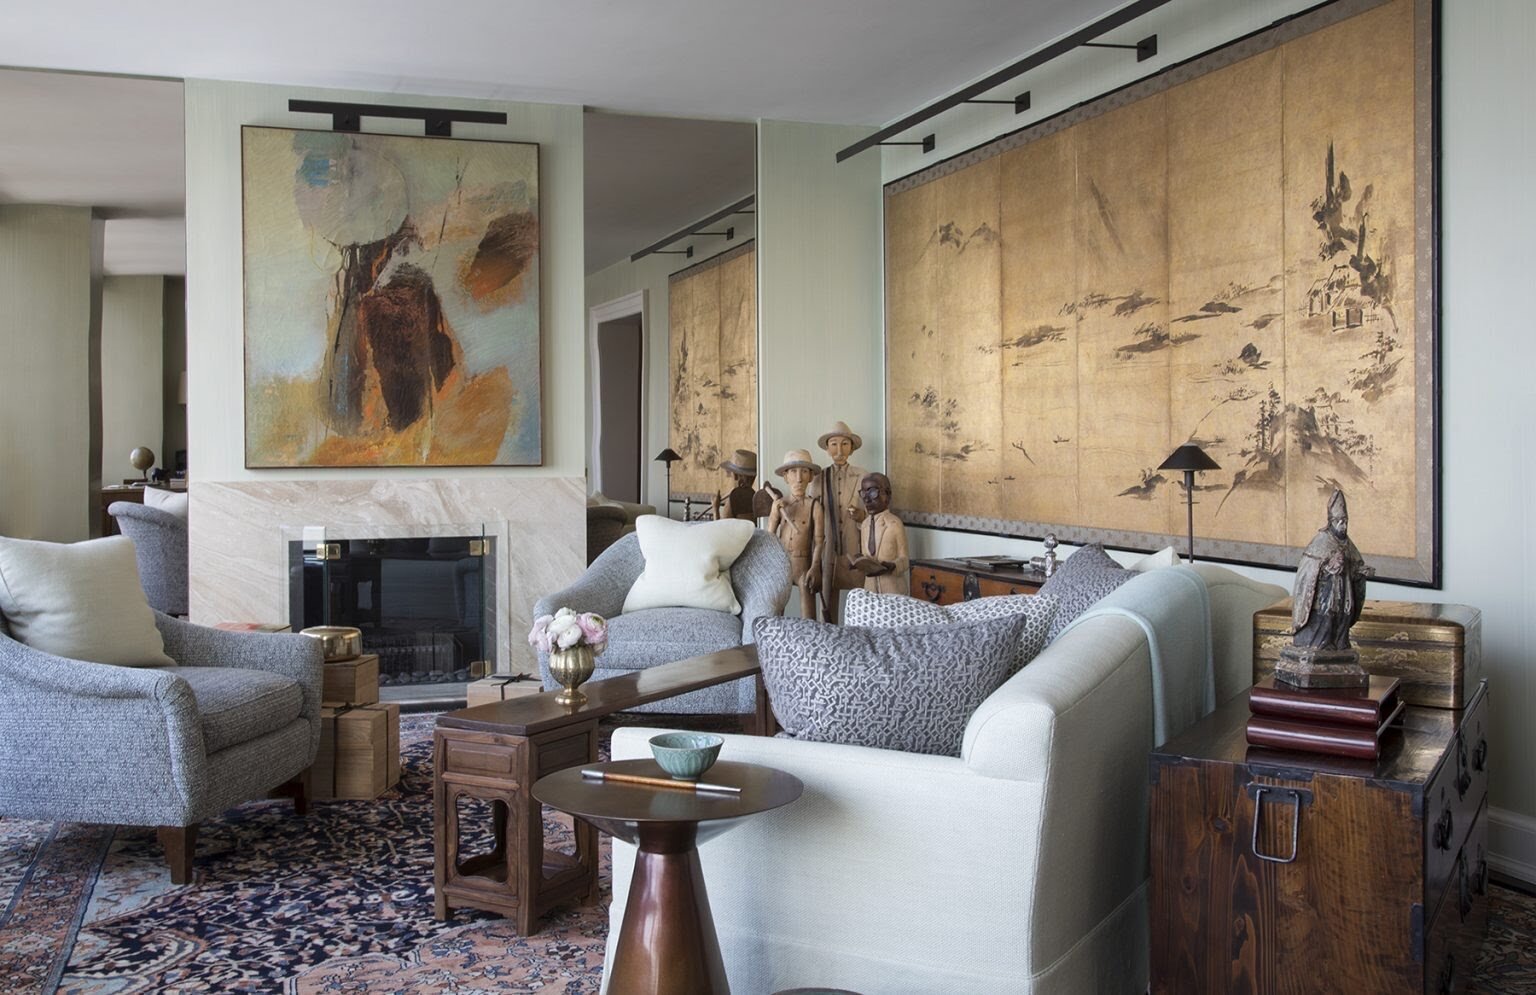  Isbell’s clients, whose townhouse he had previously done, are collectors who have had homes all over the globe. The designer pulled largely from their holdings when decorating the living room. Photo by Don Freeman 